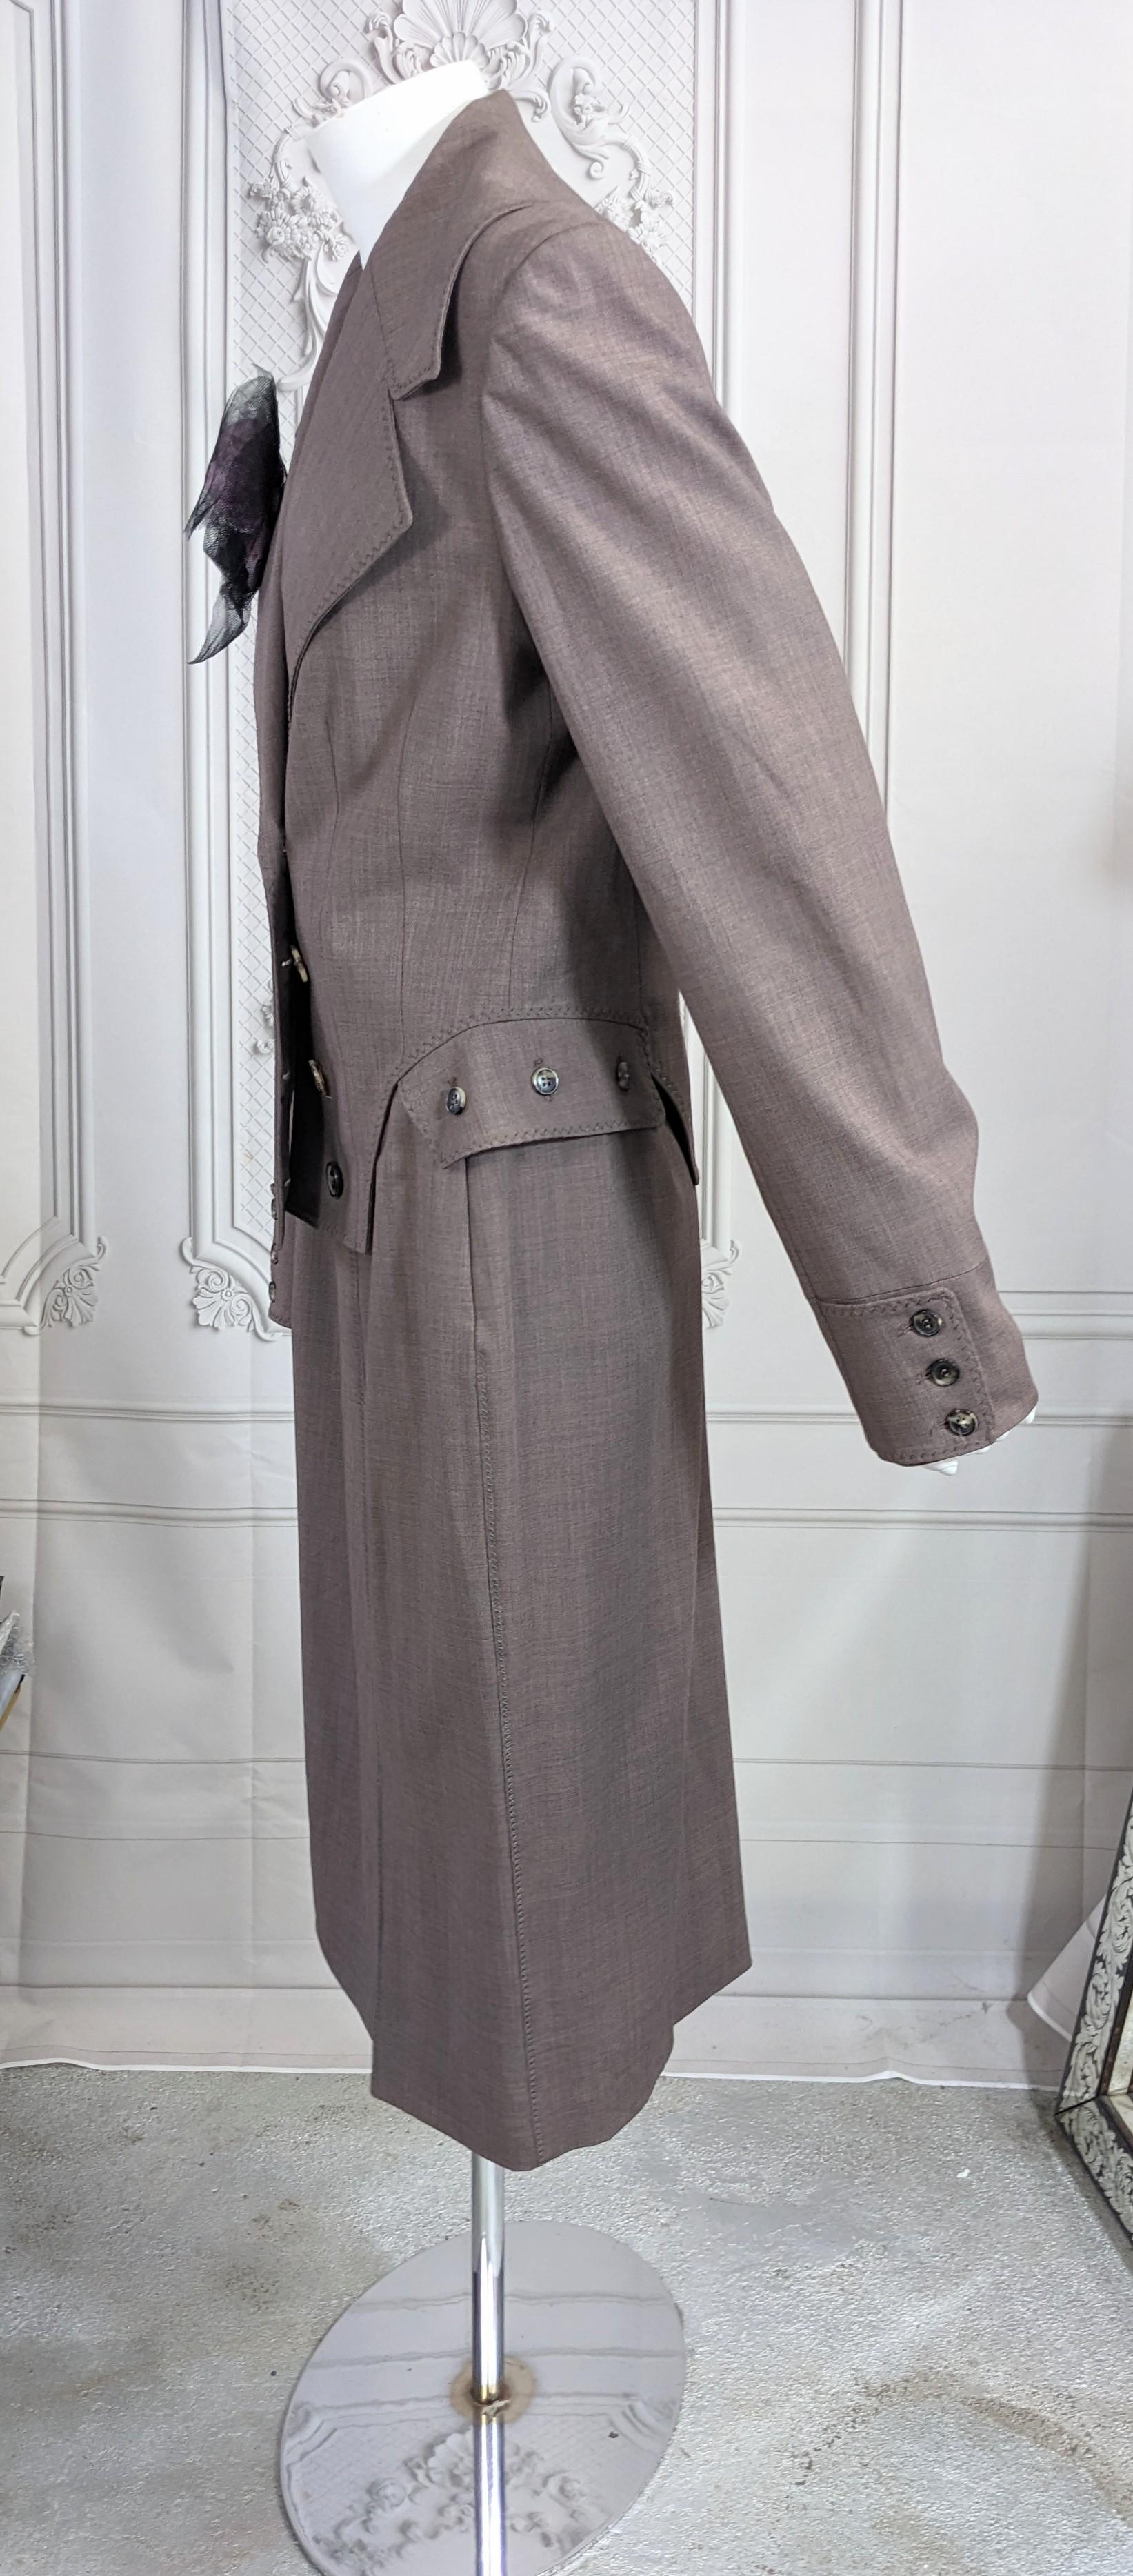 John Galliano Heathered Wool Two Piece Suit S/S 2001 For Sale 1